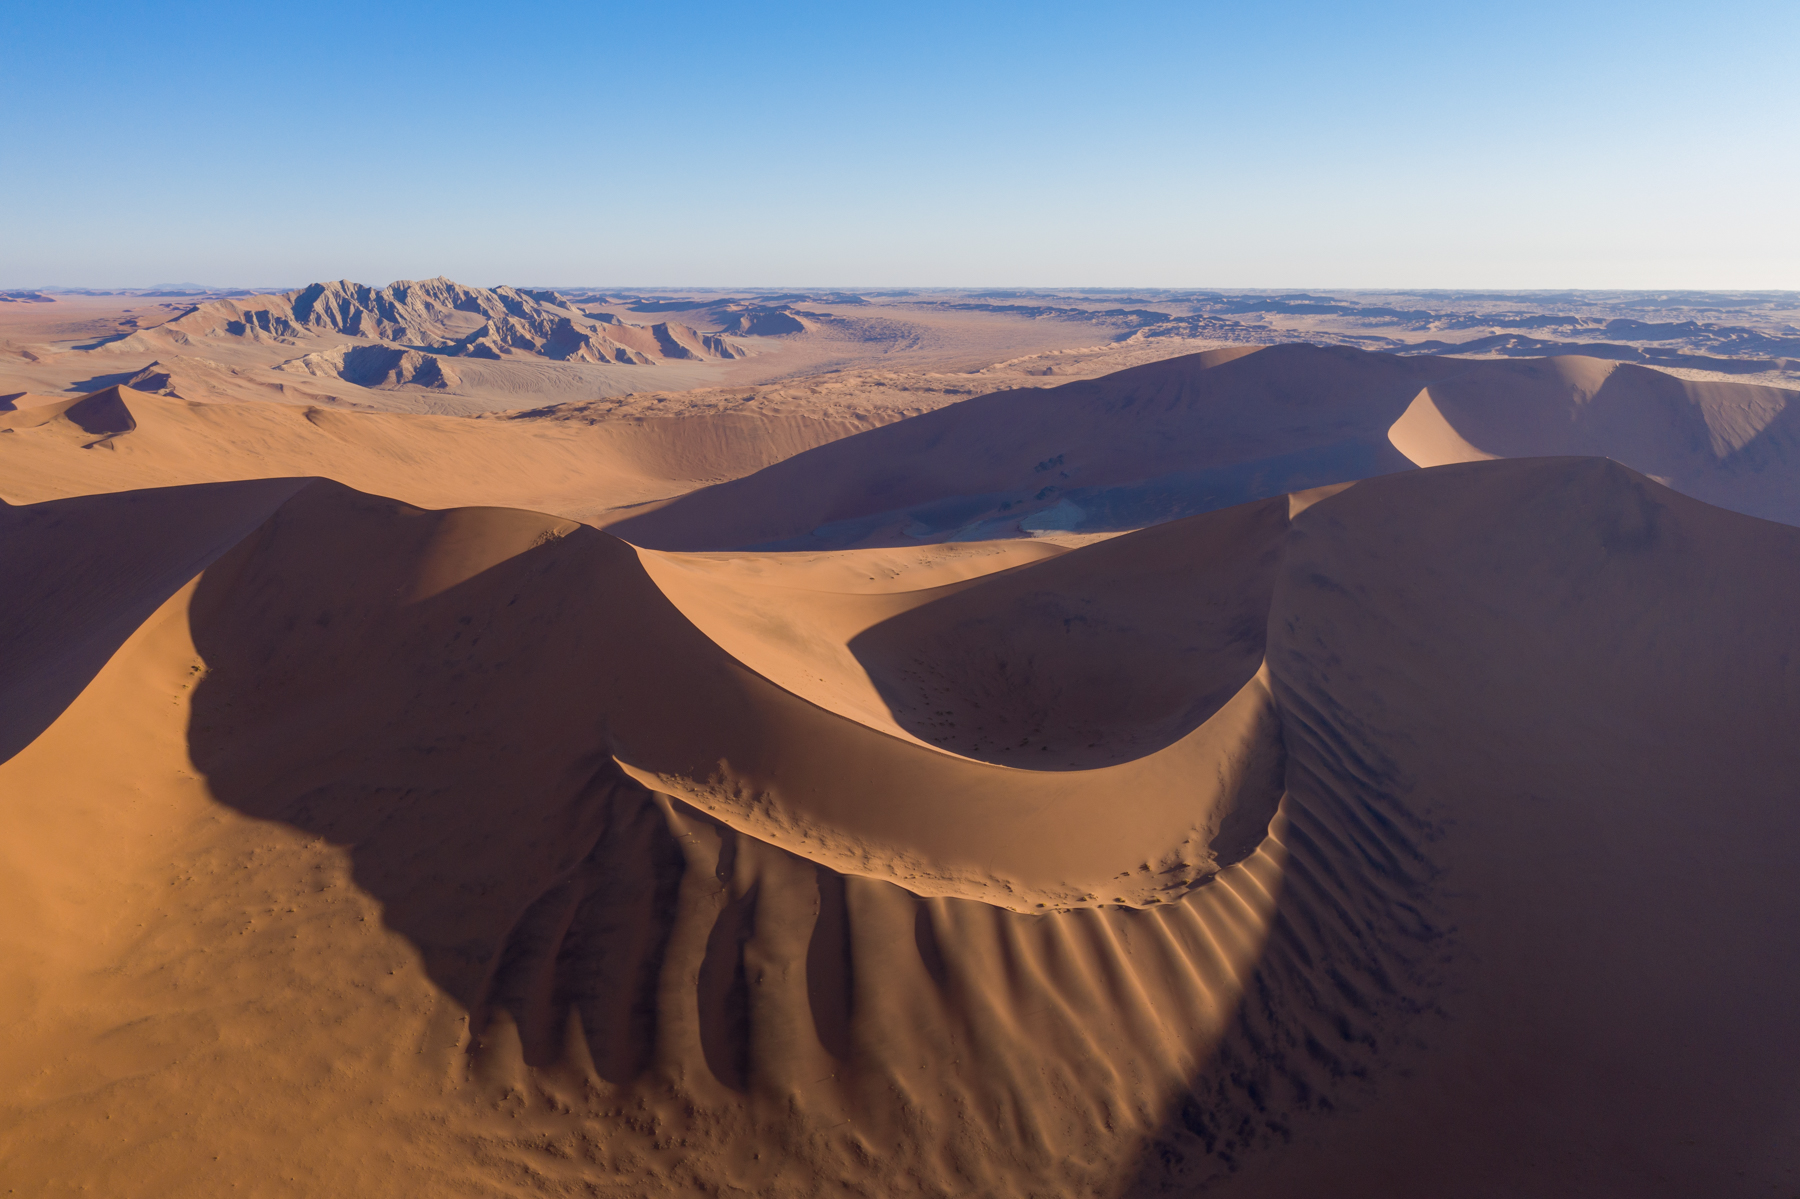 Aerial photography in Sossusvlei is one of the most sublime experiences in all of Africa